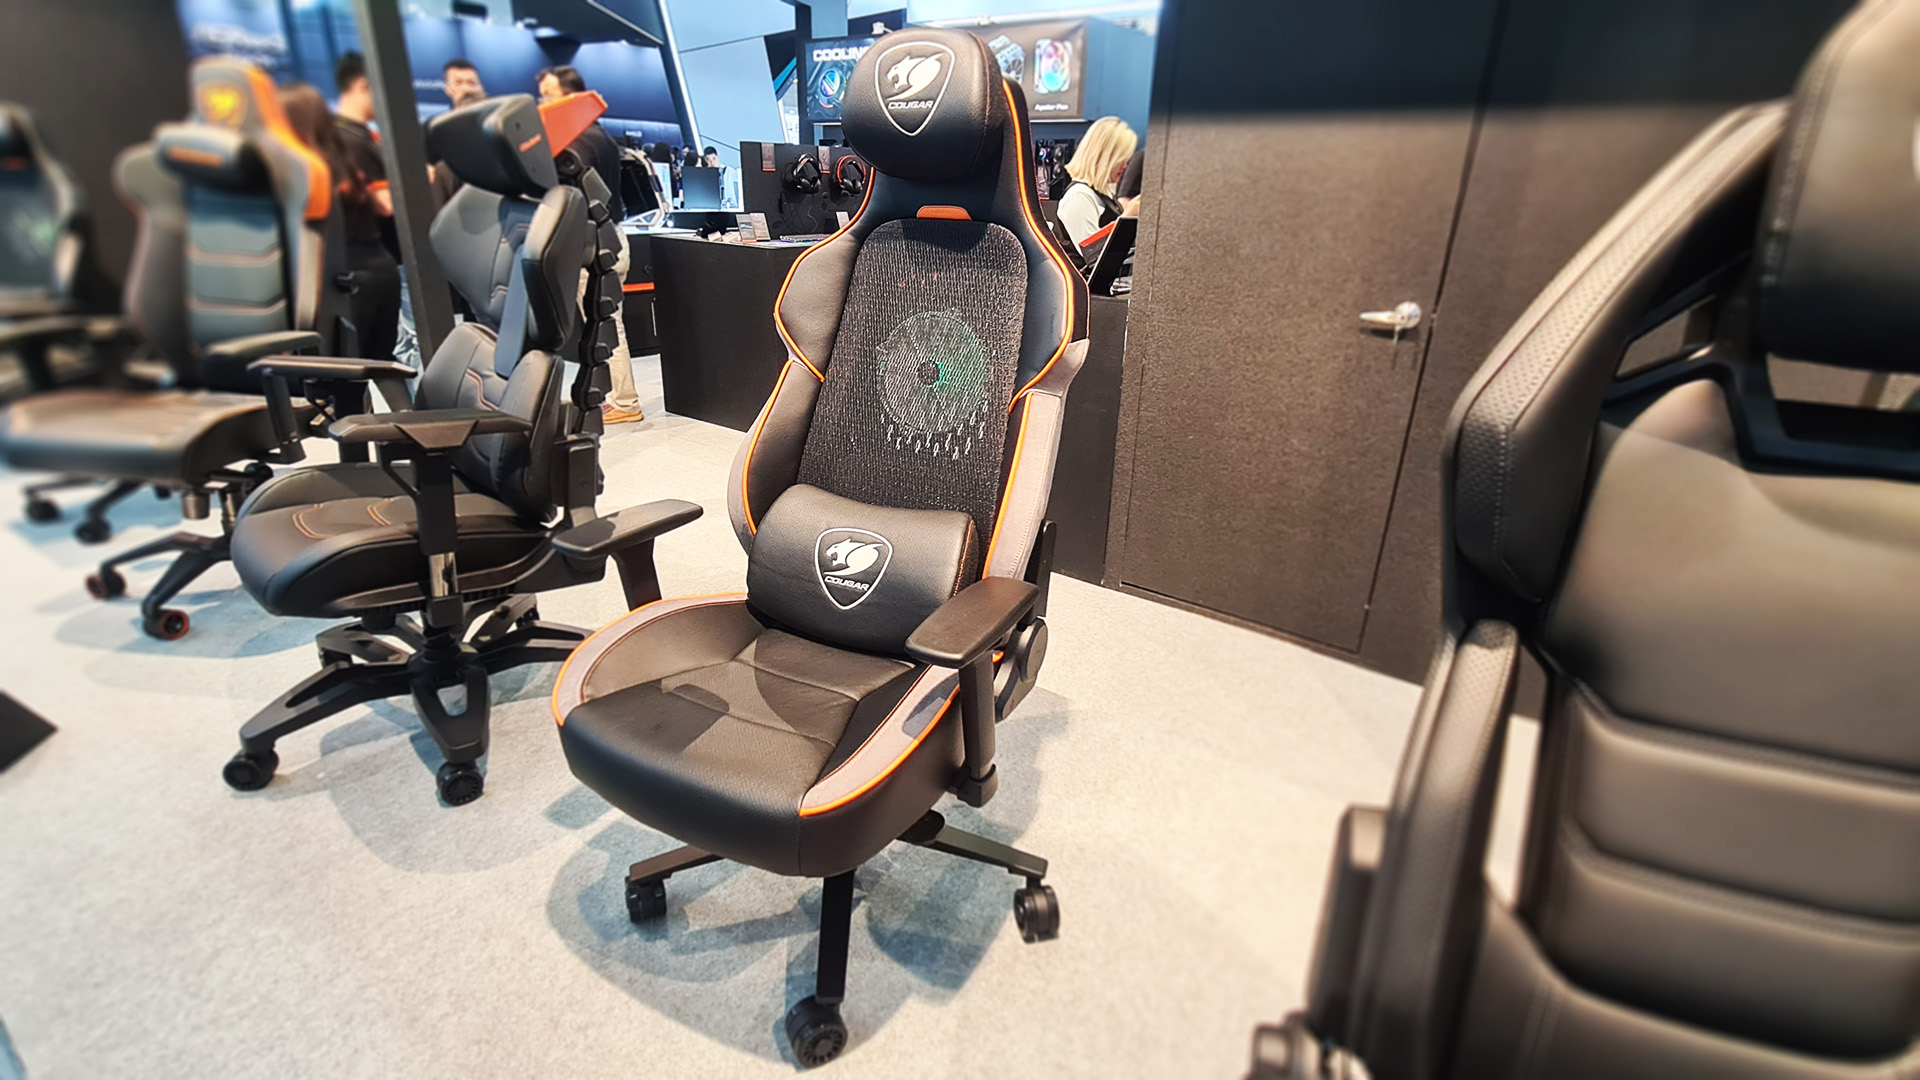  After a full Computex day in 32 degree heat I've never been happier to sit in a gaming chair with a fan in the backrest 